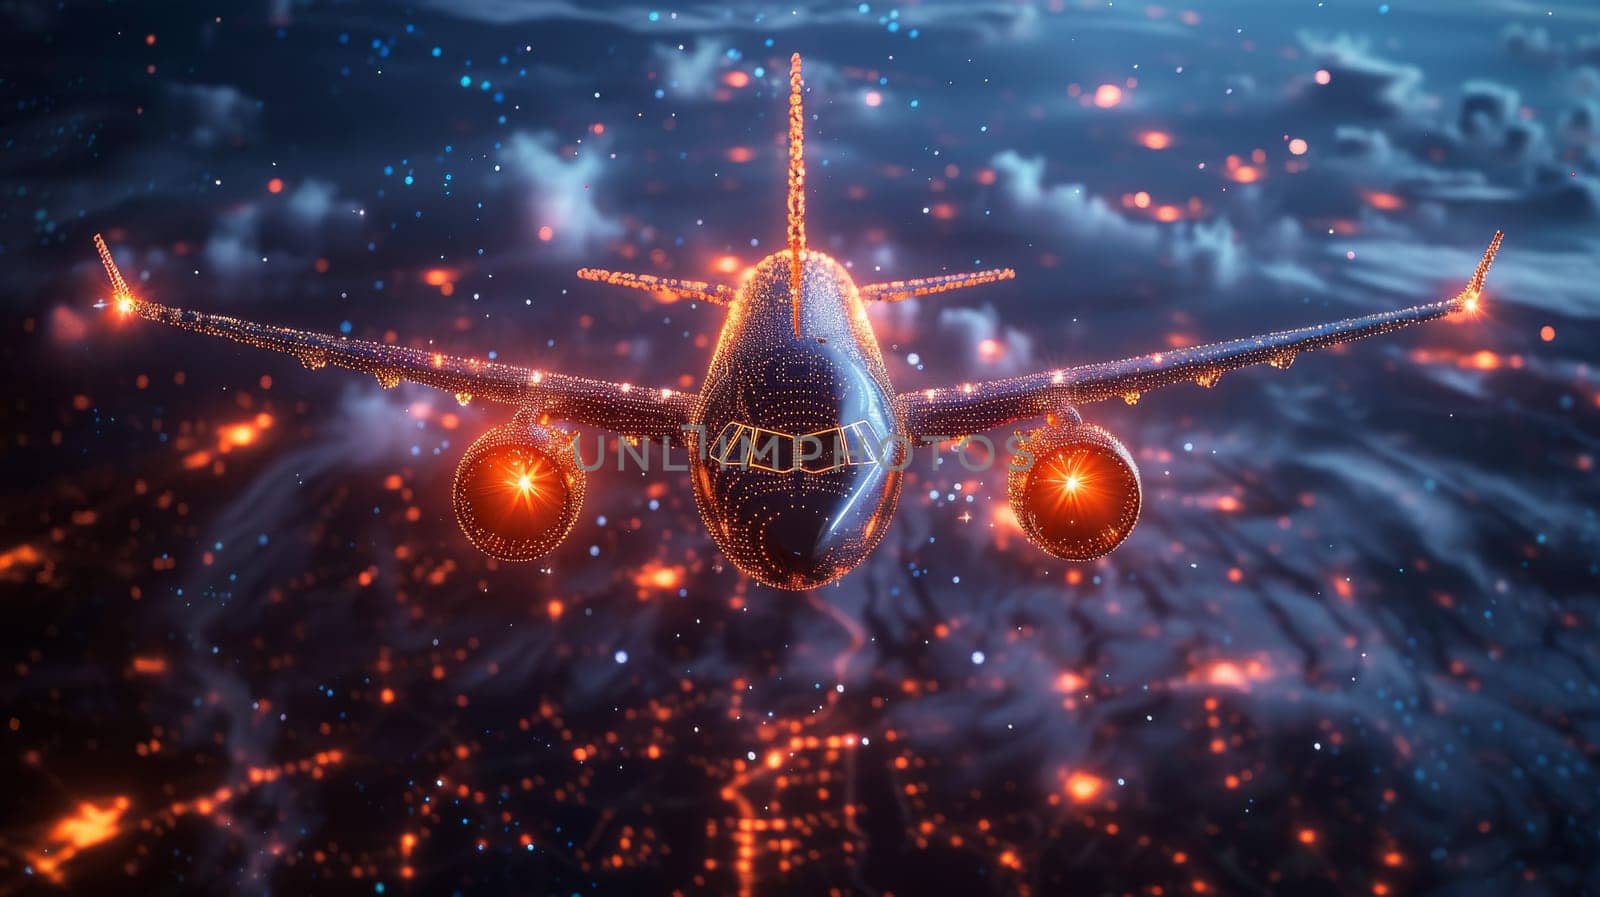 A plane is flying through a city at night with a bright orange sun in the background. The sky is filled with glowing lights, creating a surreal and dreamlike atmosphere